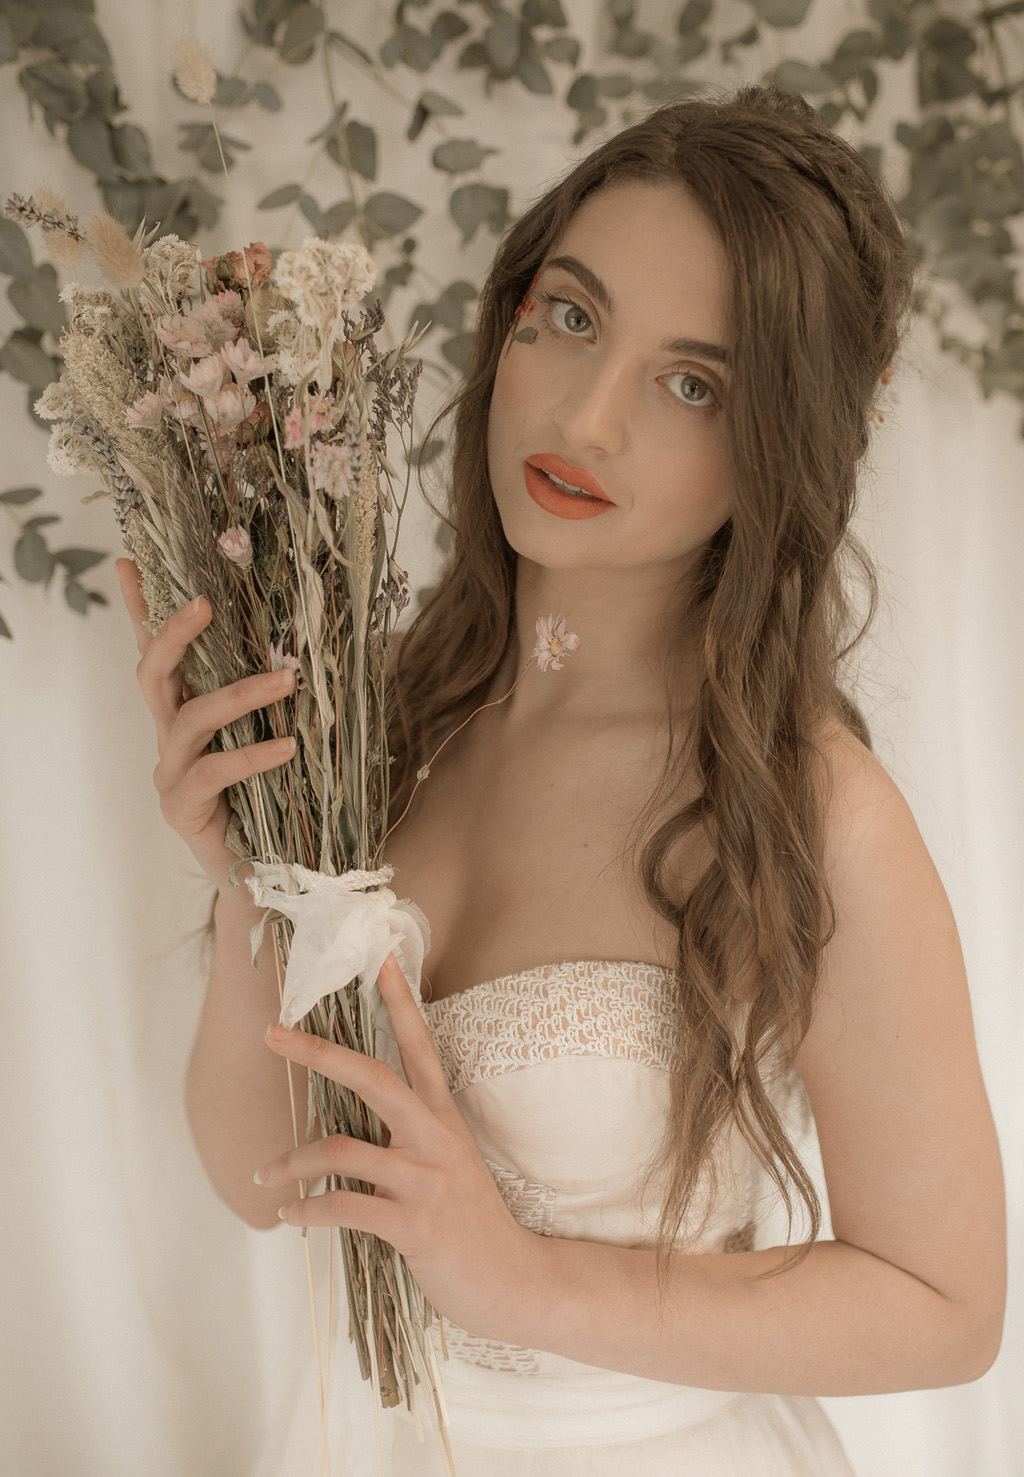 Where the Wild Things Grow 2022 bridal collection by ethical UK wedding dress designer Jessica Turner